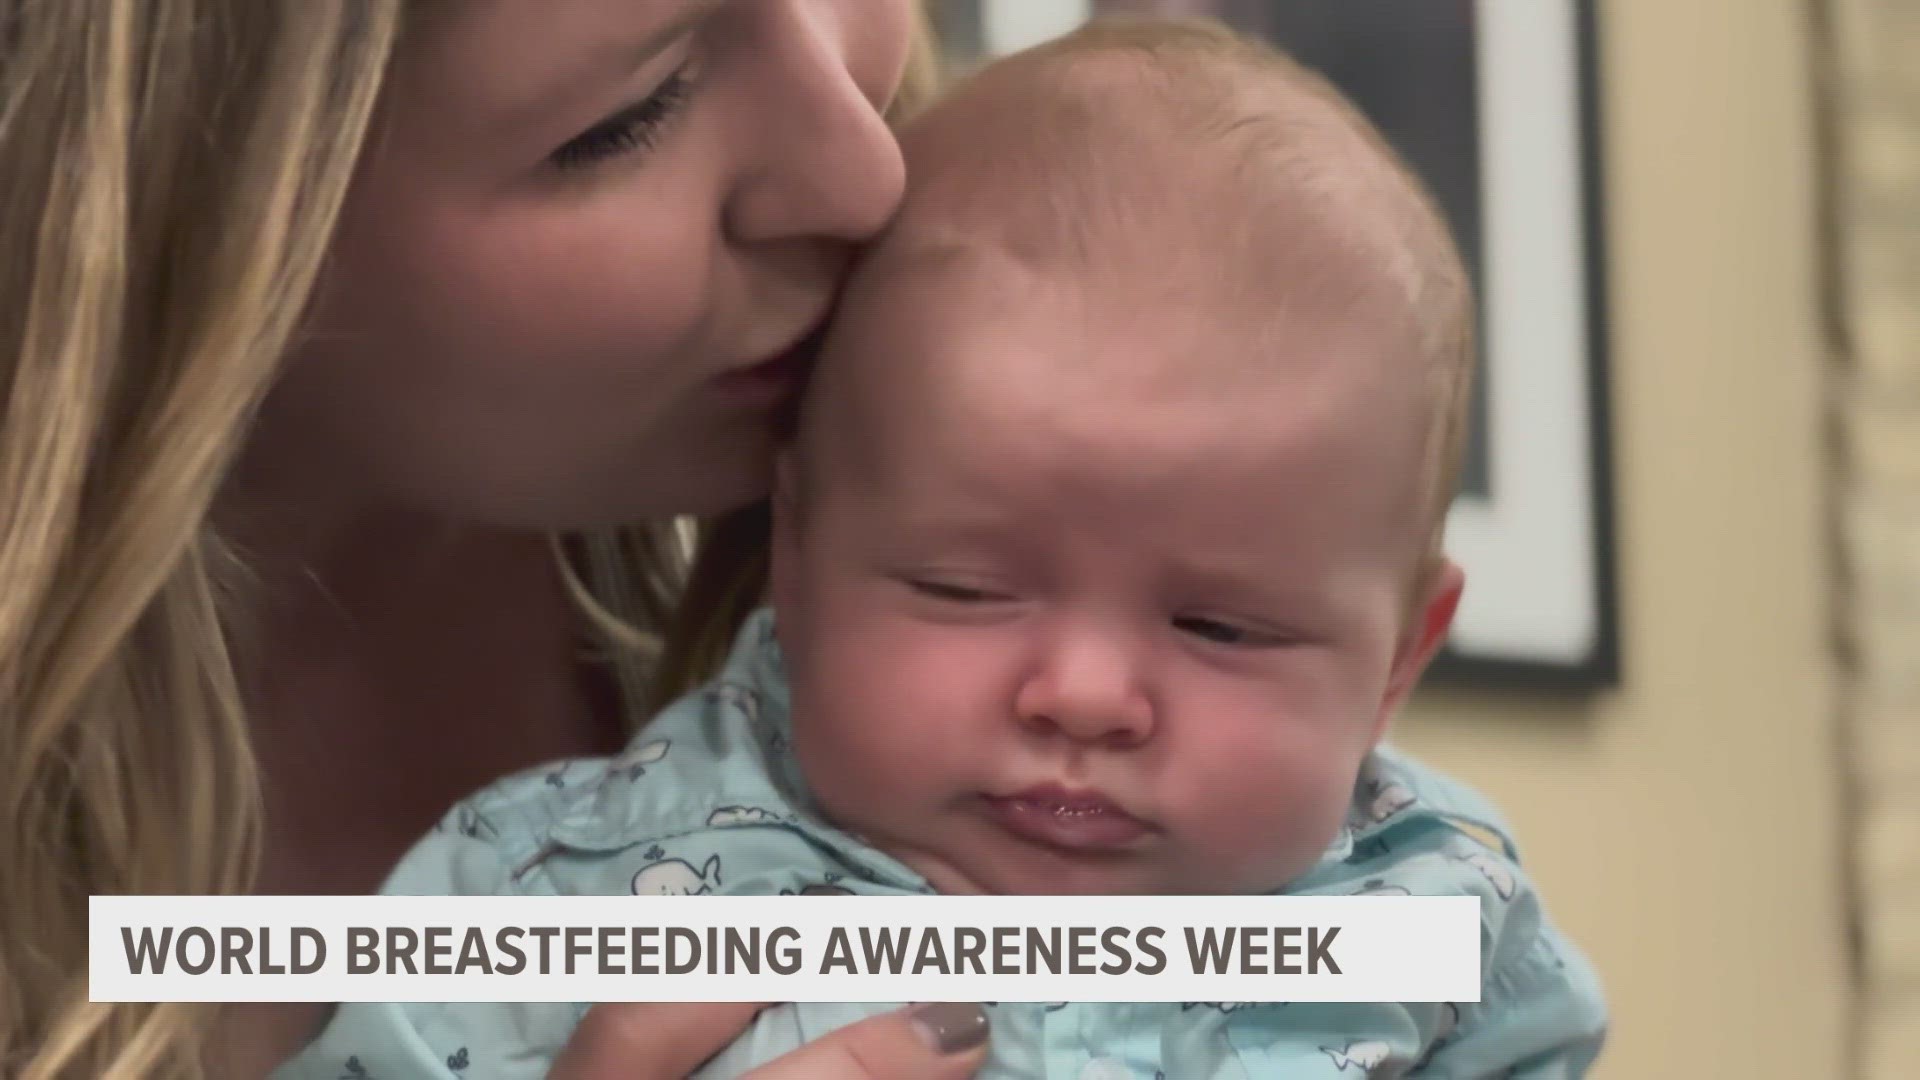 During World Breastfeeding Awareness Week, moms meet at Corewell Health breastfeeding group to find support with a challenging, often underestimated journey.